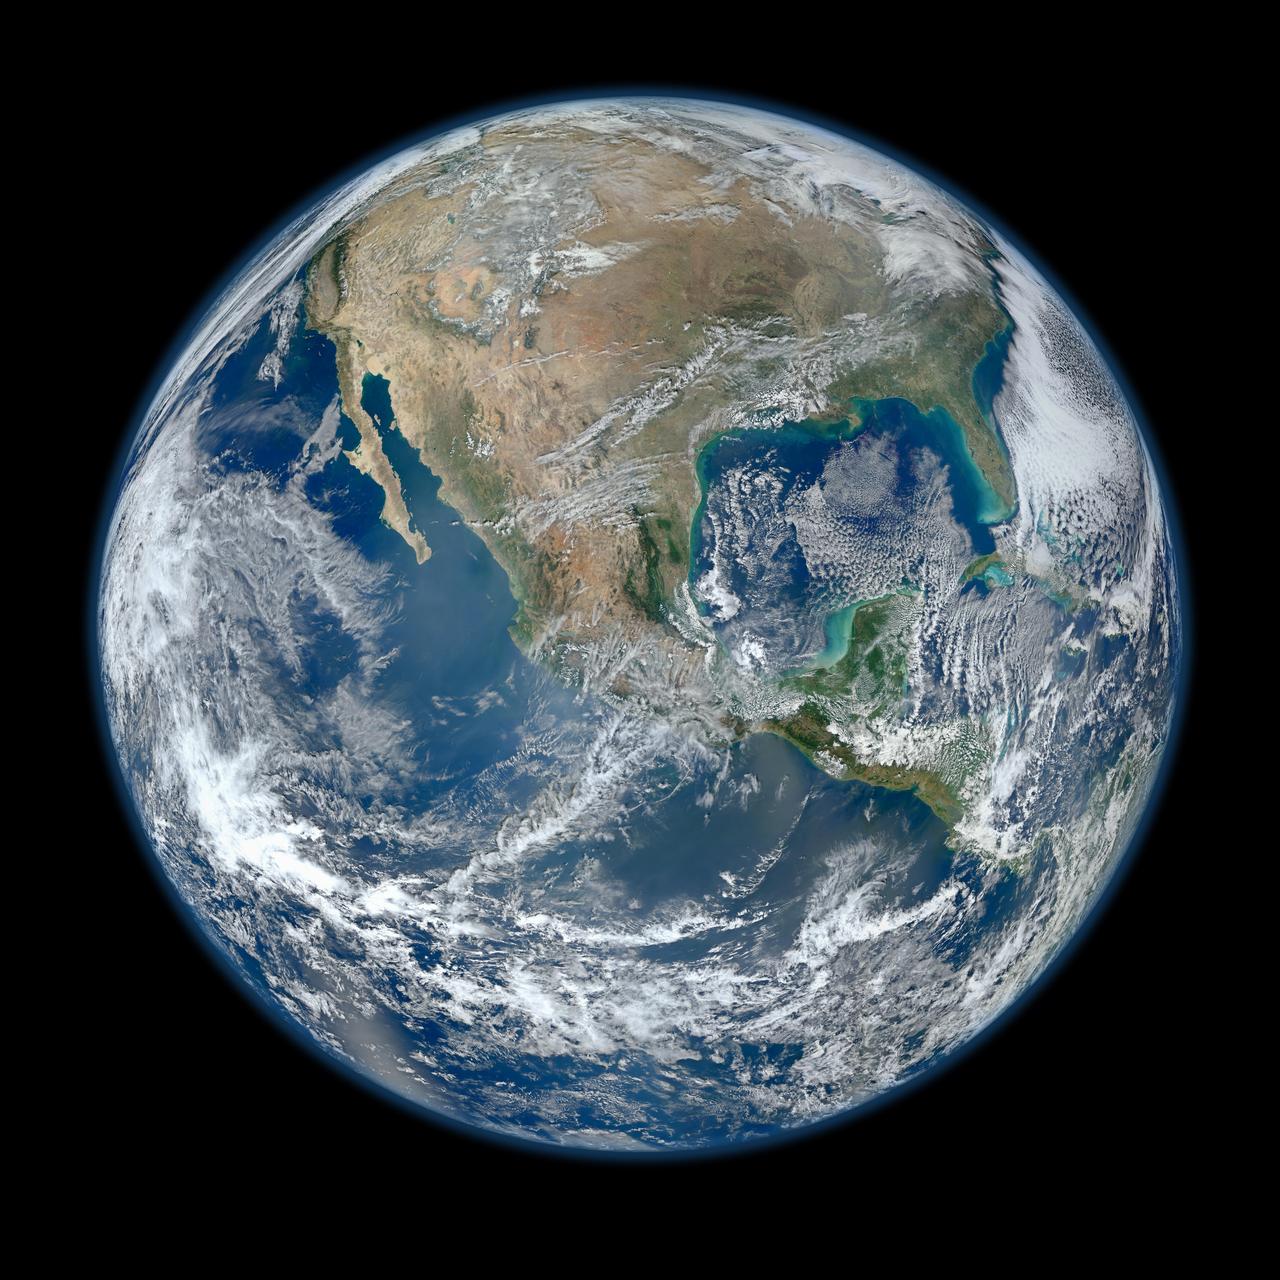 satellite image montage of Earth